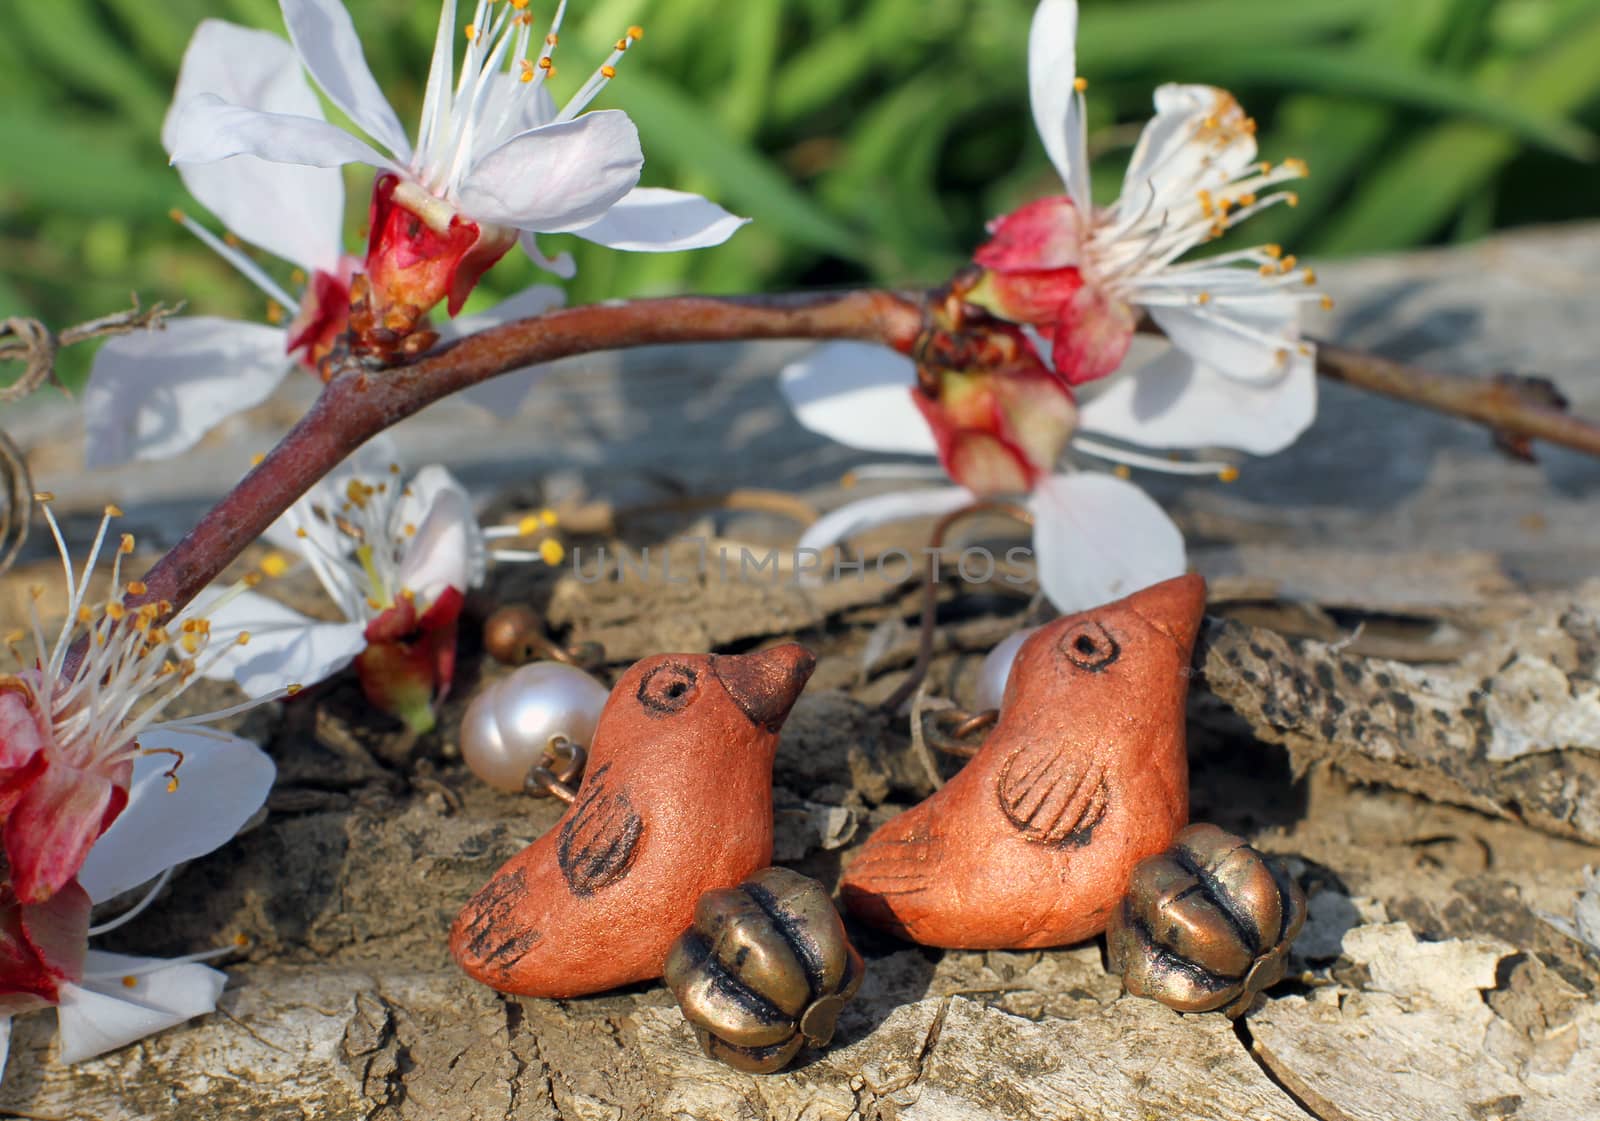 Handmade clay bird earrings with apricot blossom in spring on the nature background